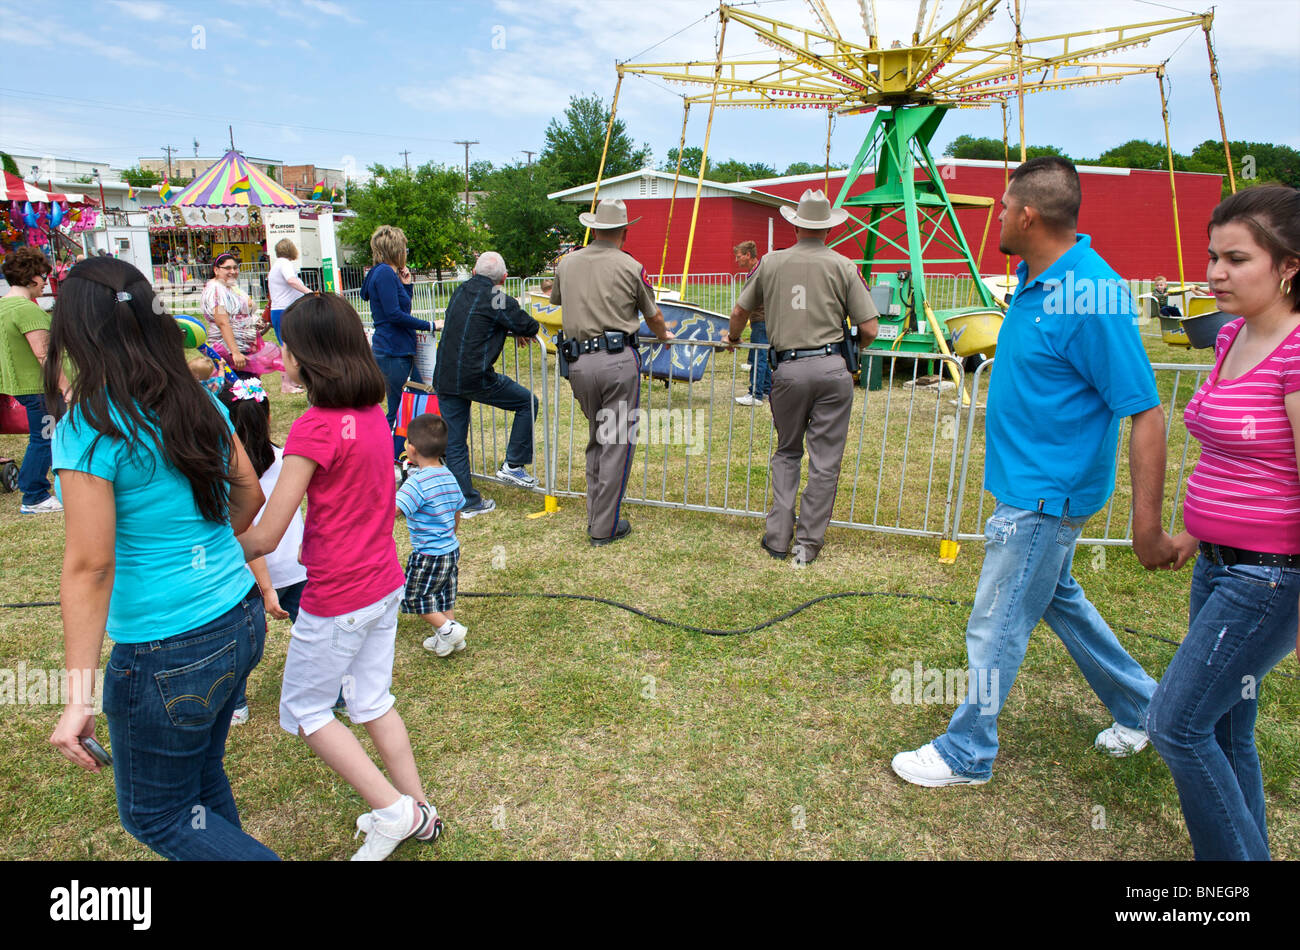 Police officers on duty at funfair in Texas, USA Stock Photo